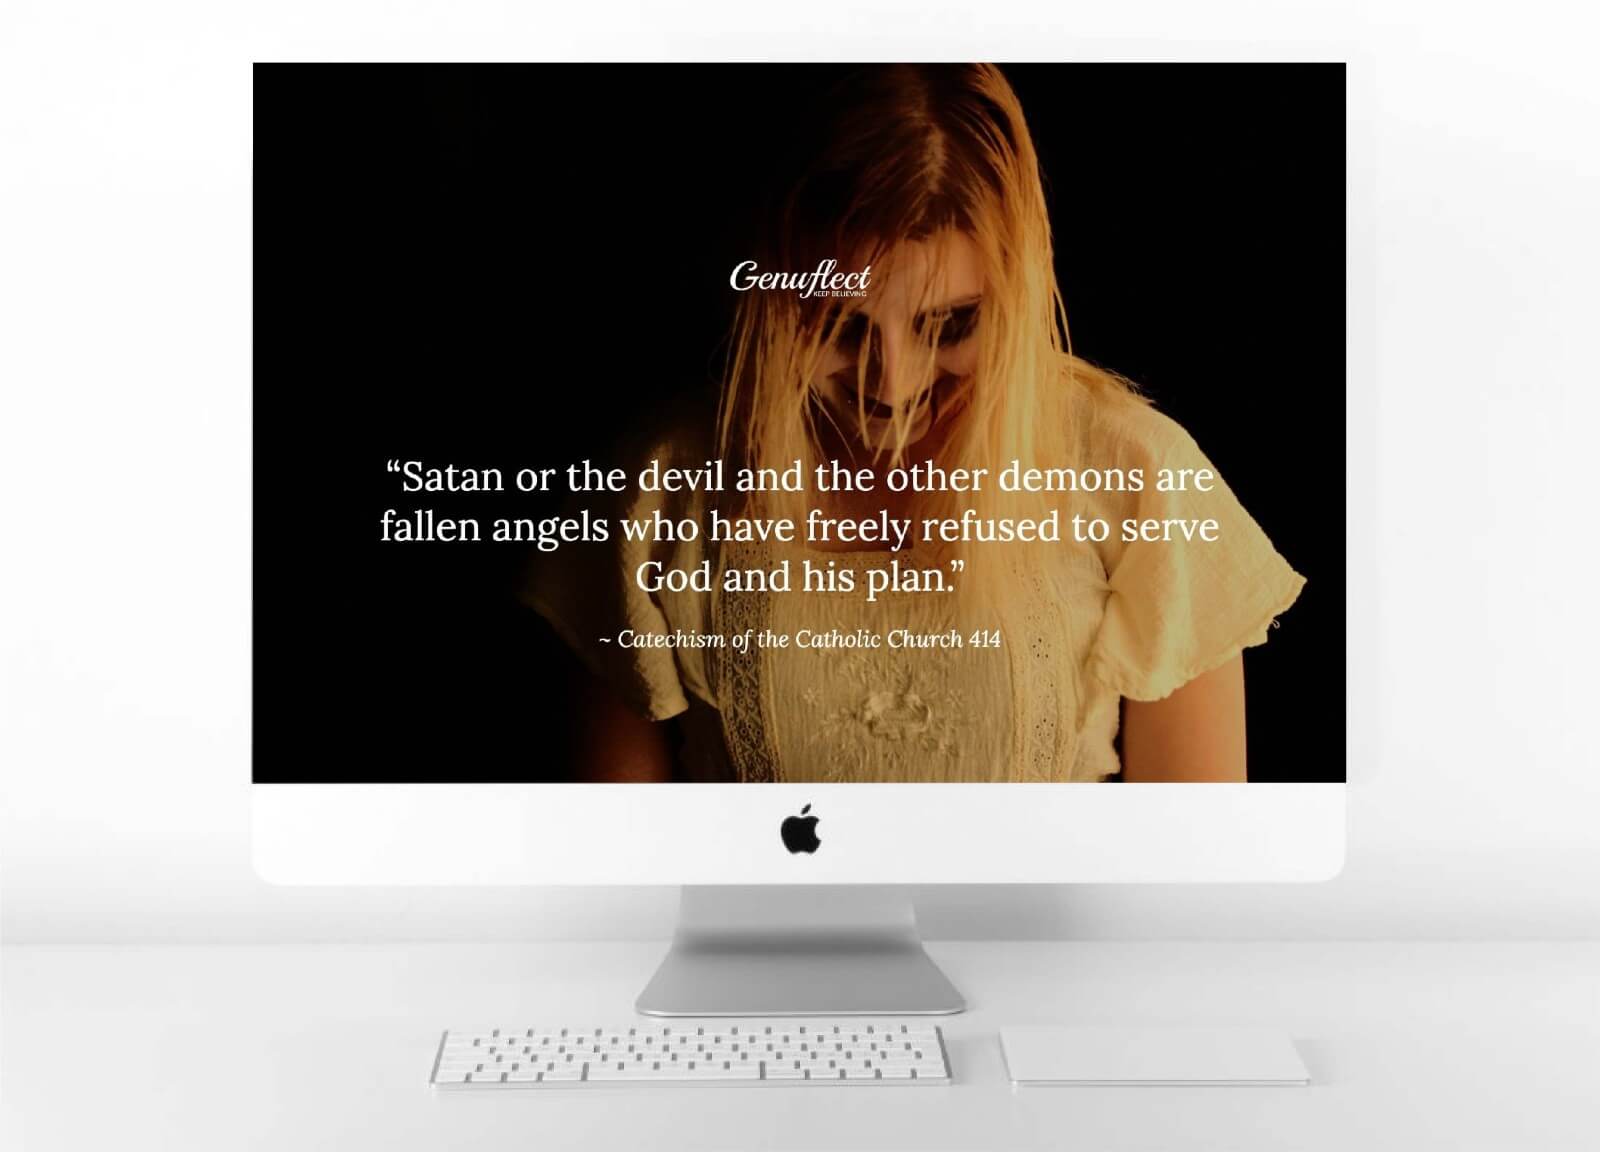 Genuflect image on computer background of Ghoulish looking girl with scary makeup